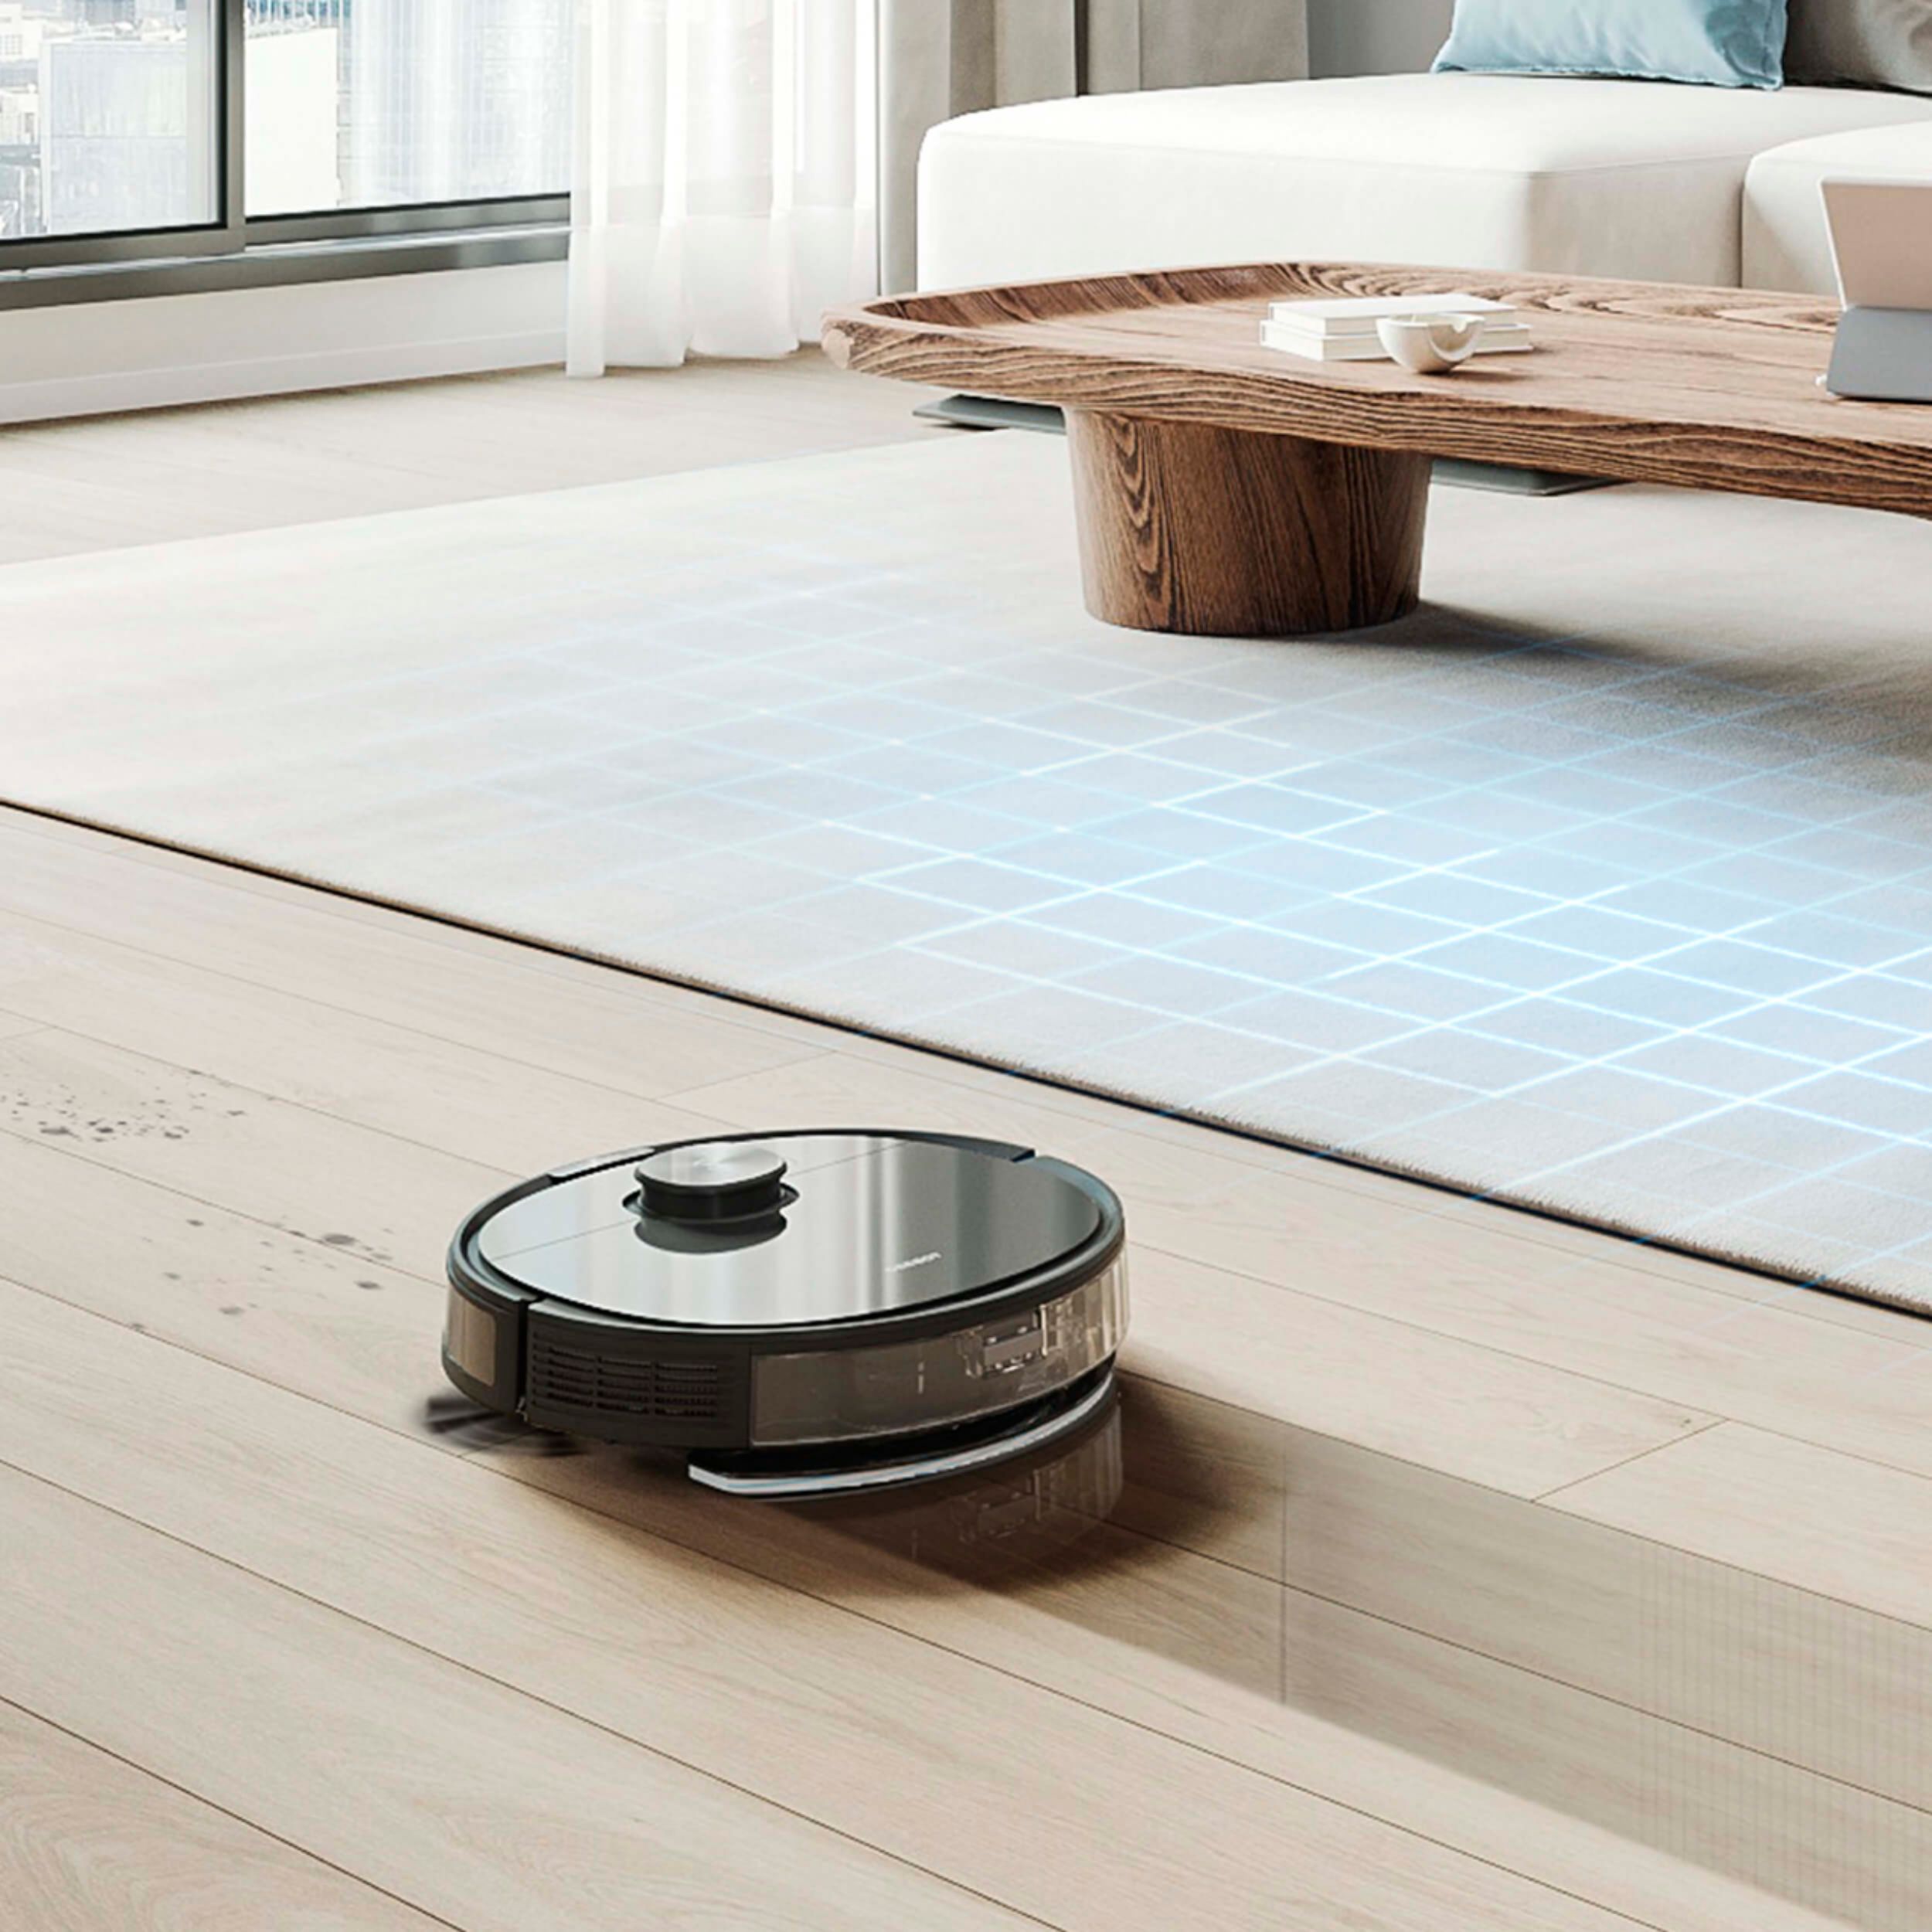 Left View: ECOVACS Robotics - DEEBOT N8+ Vacuum & Mop Robot with Advanced Laser Mapping and Auto-Empty Station - Black